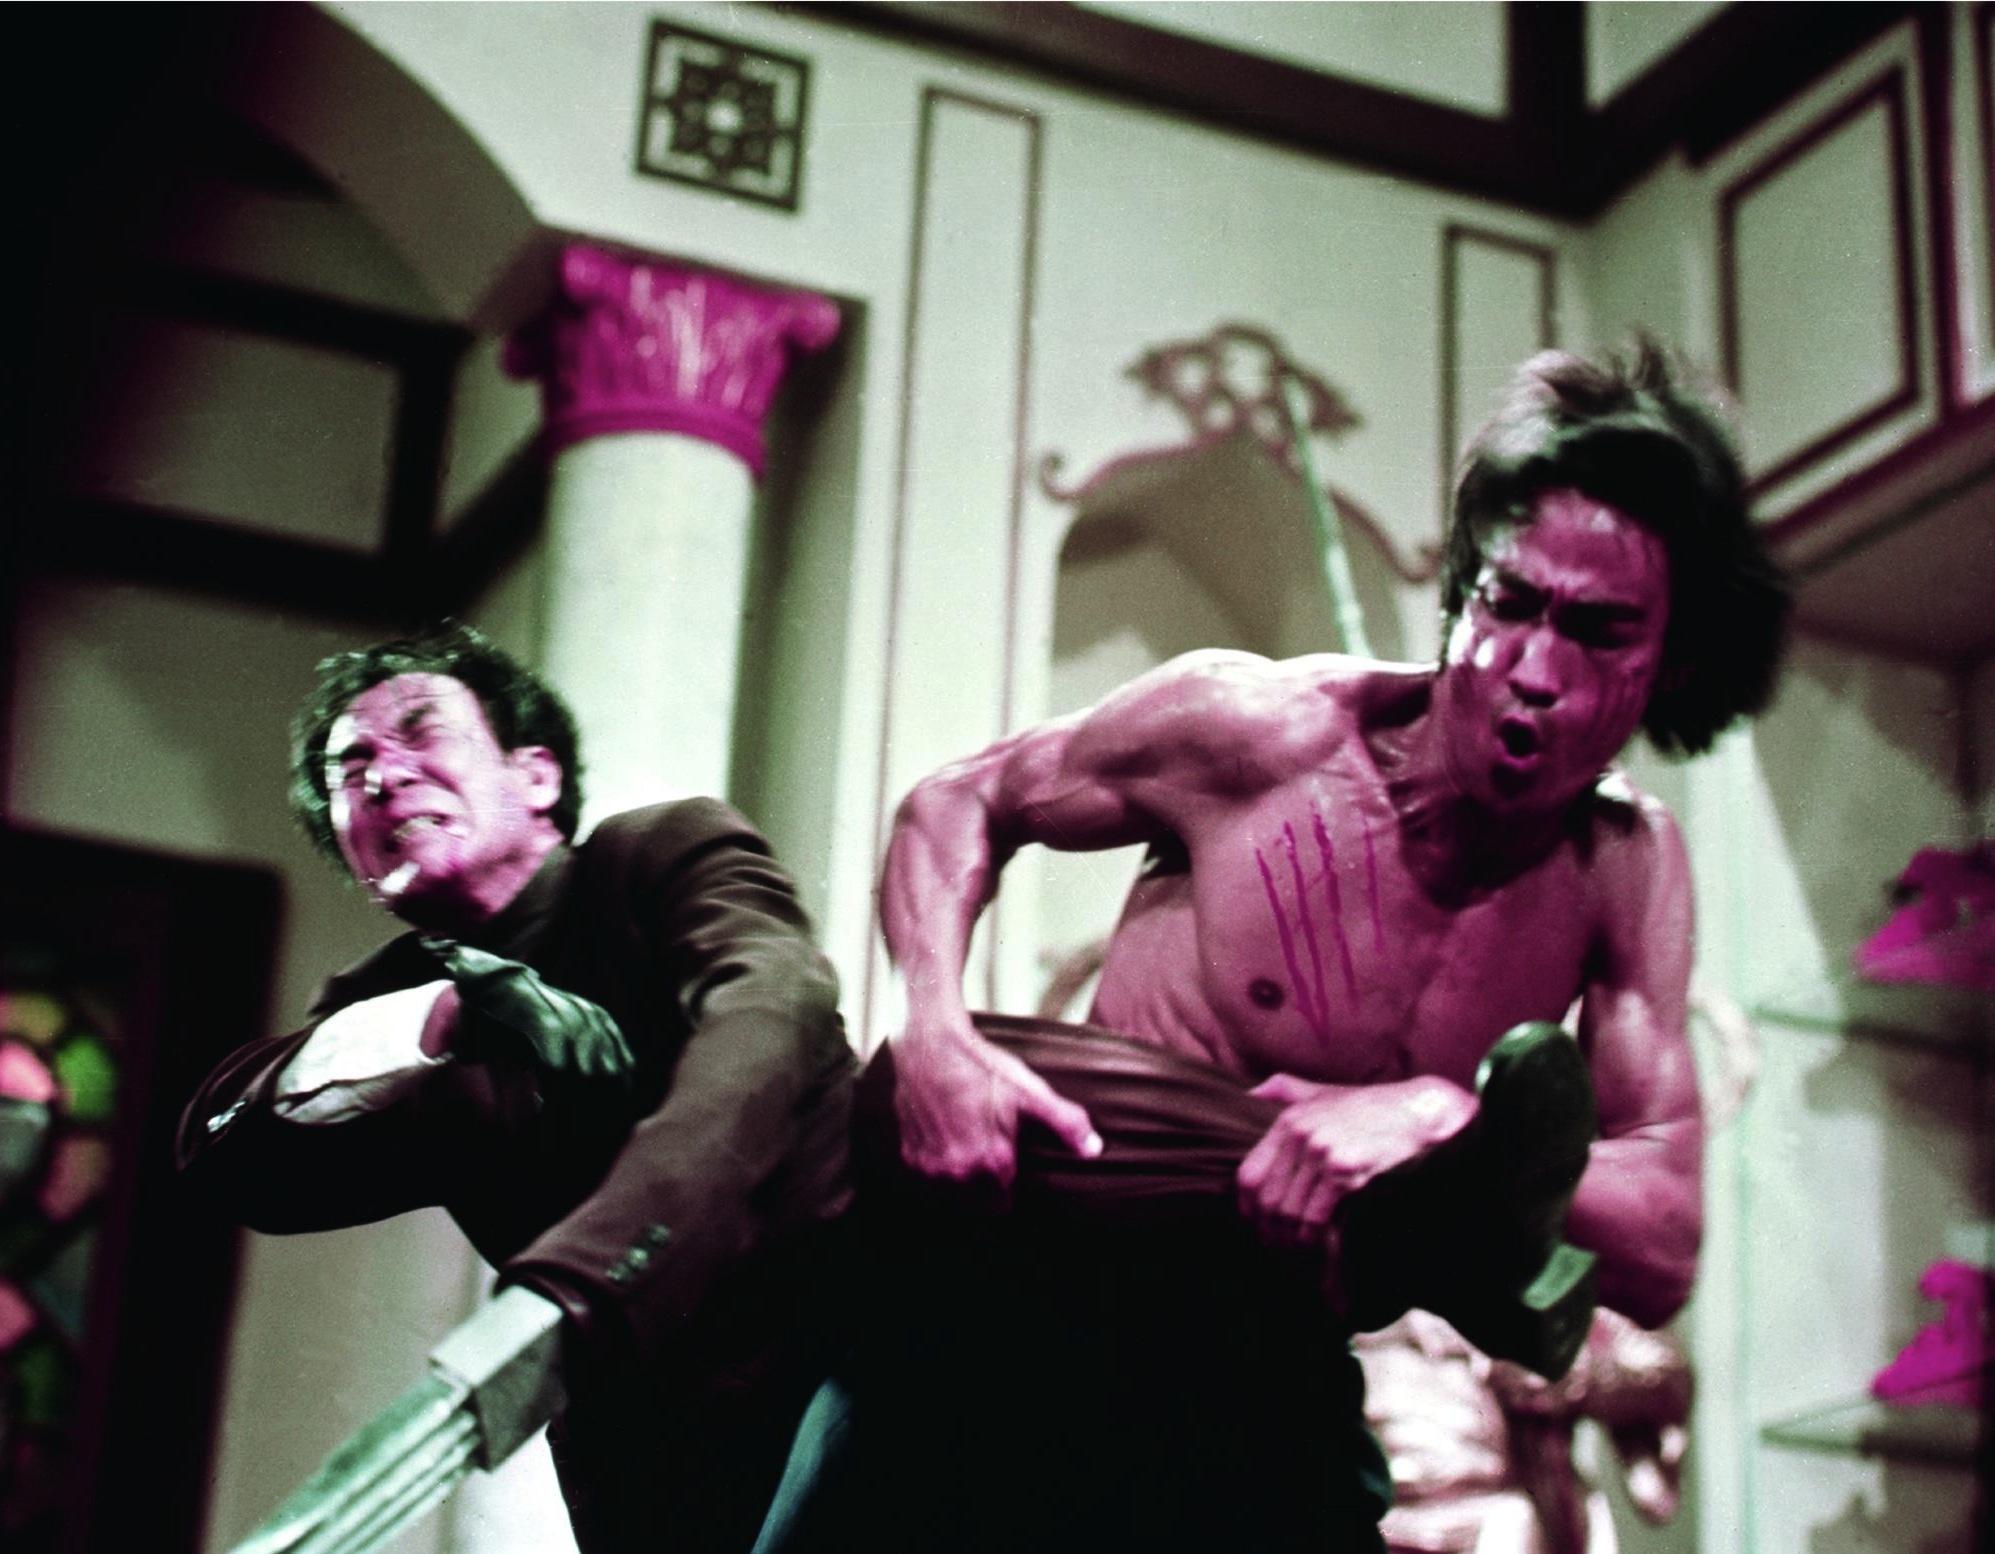 enter the dragon full movie in english free download